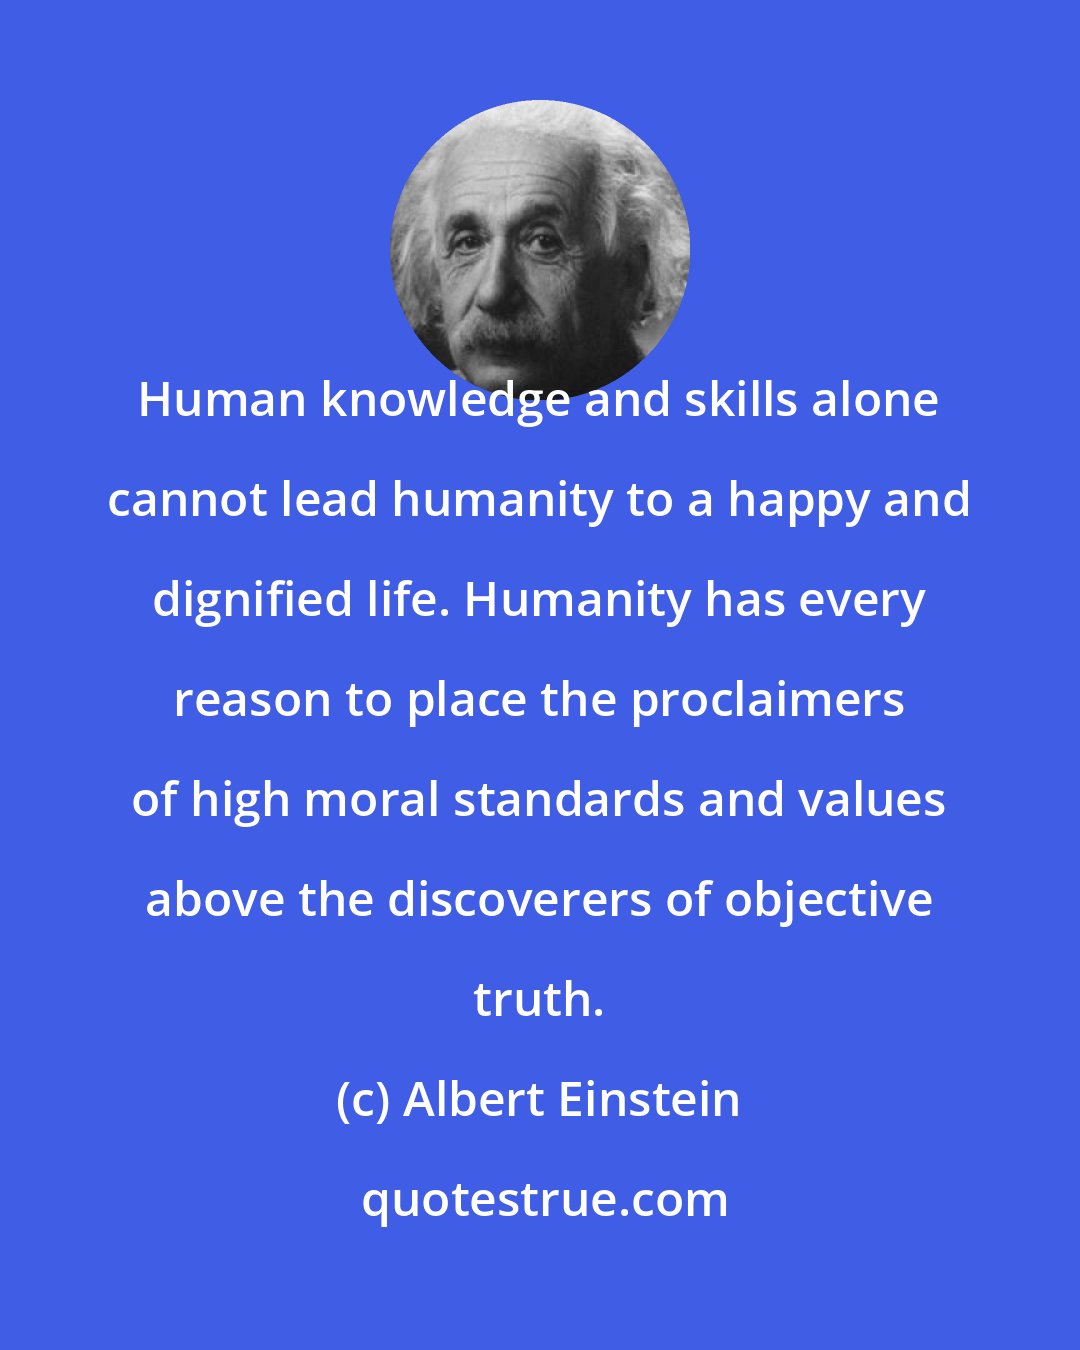 Albert Einstein: Human knowledge and skills alone cannot lead humanity to a happy and dignified life. Humanity has every reason to place the proclaimers of high moral standards and values above the discoverers of objective truth.